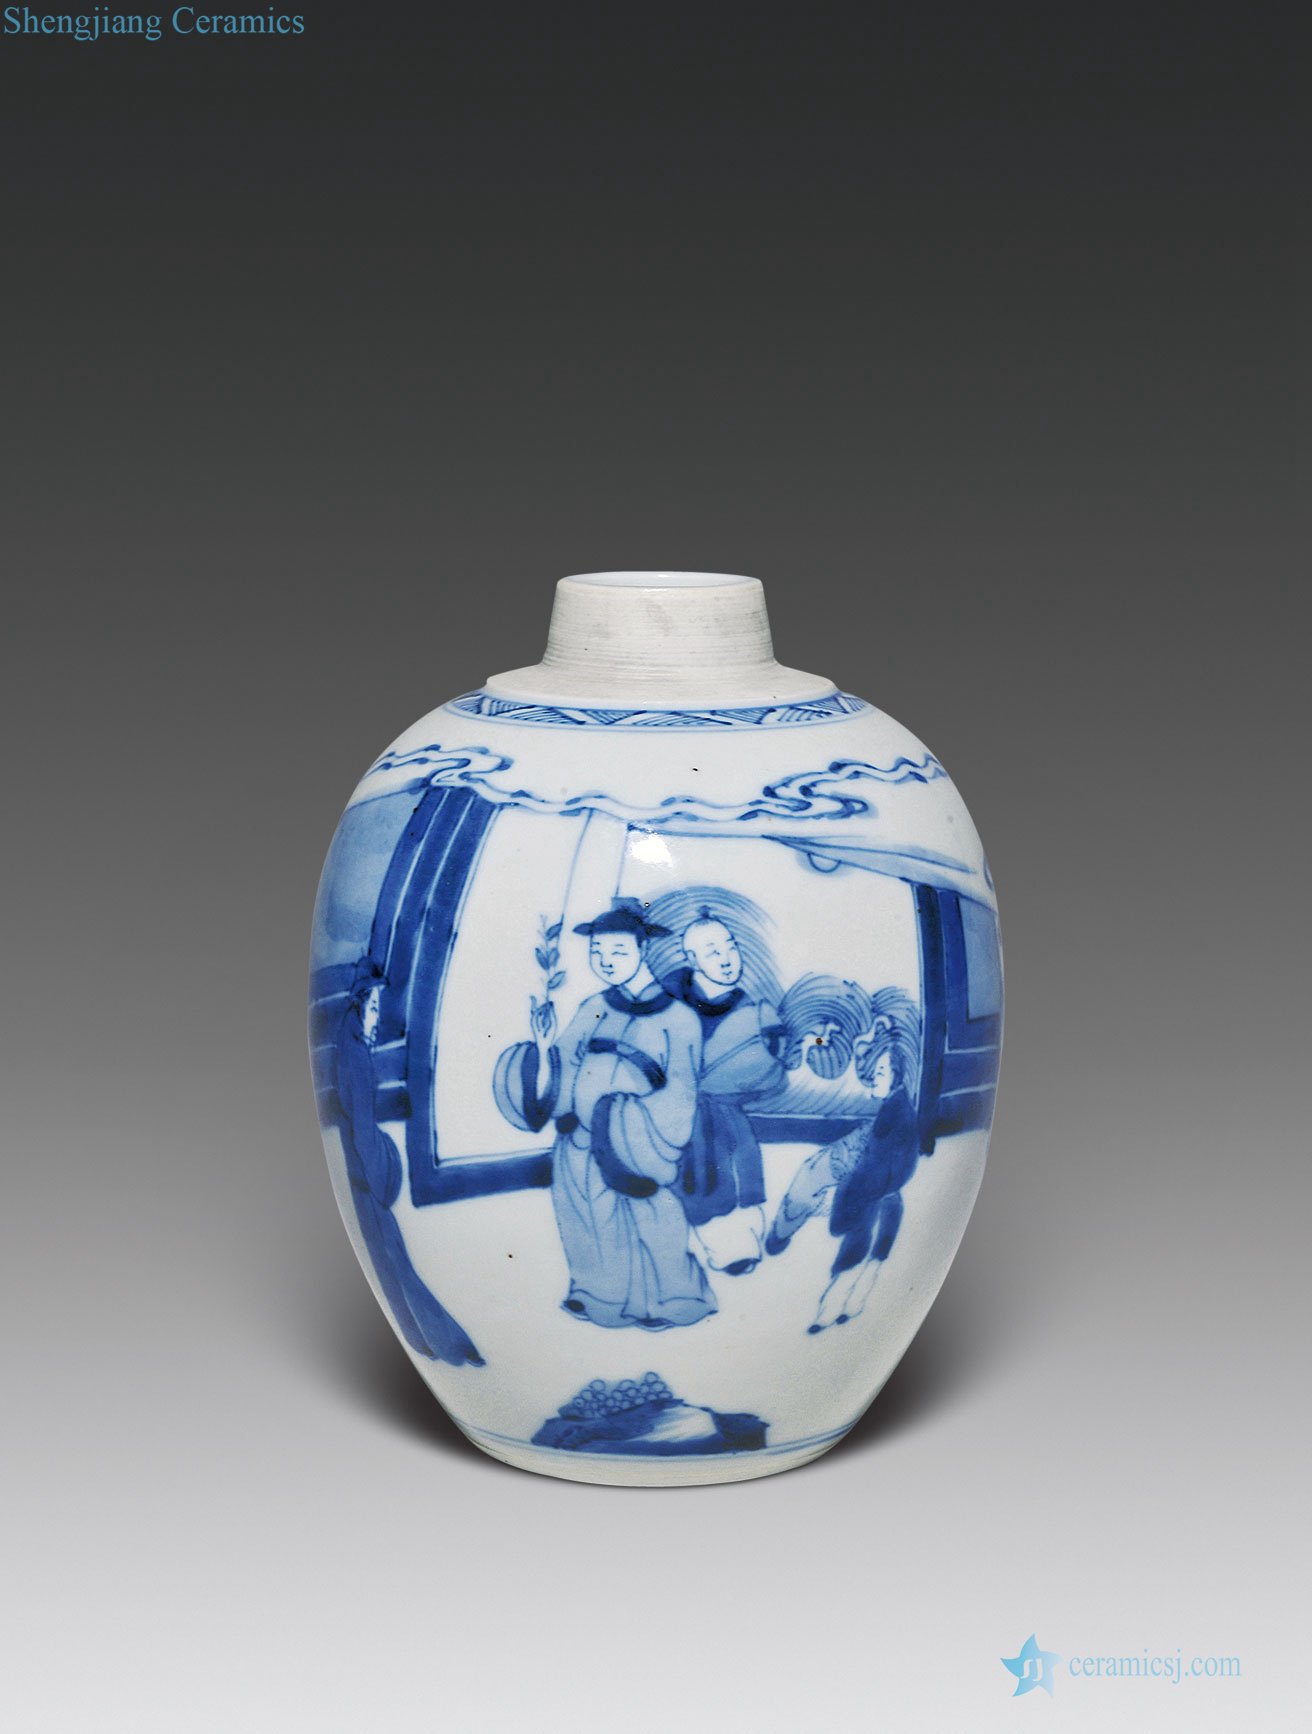 The qing emperor kangxi porcelain figure canister won